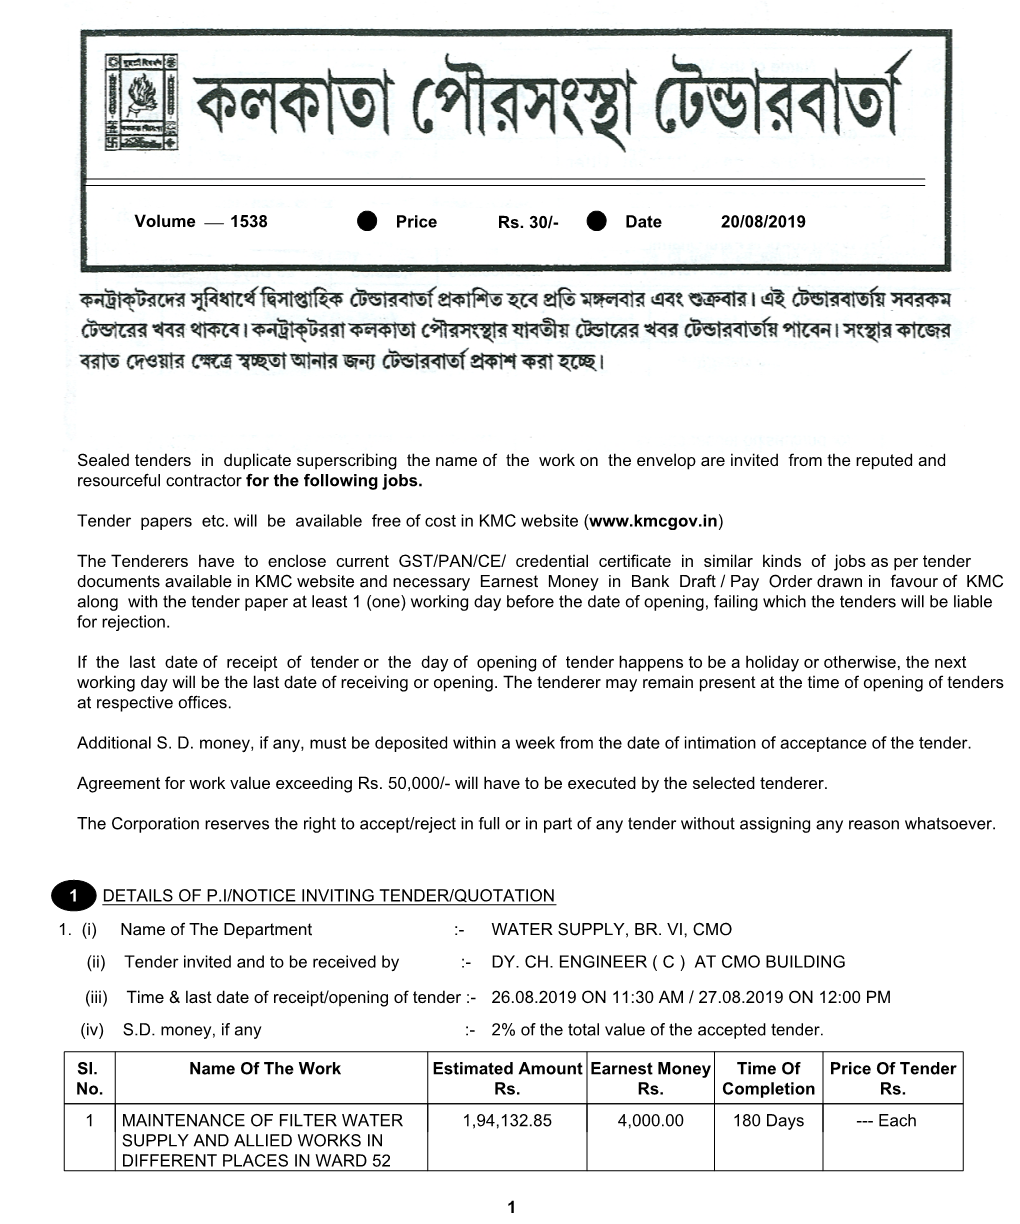 1 Details of P.I/Notice Inviting Tender/Quotation 1